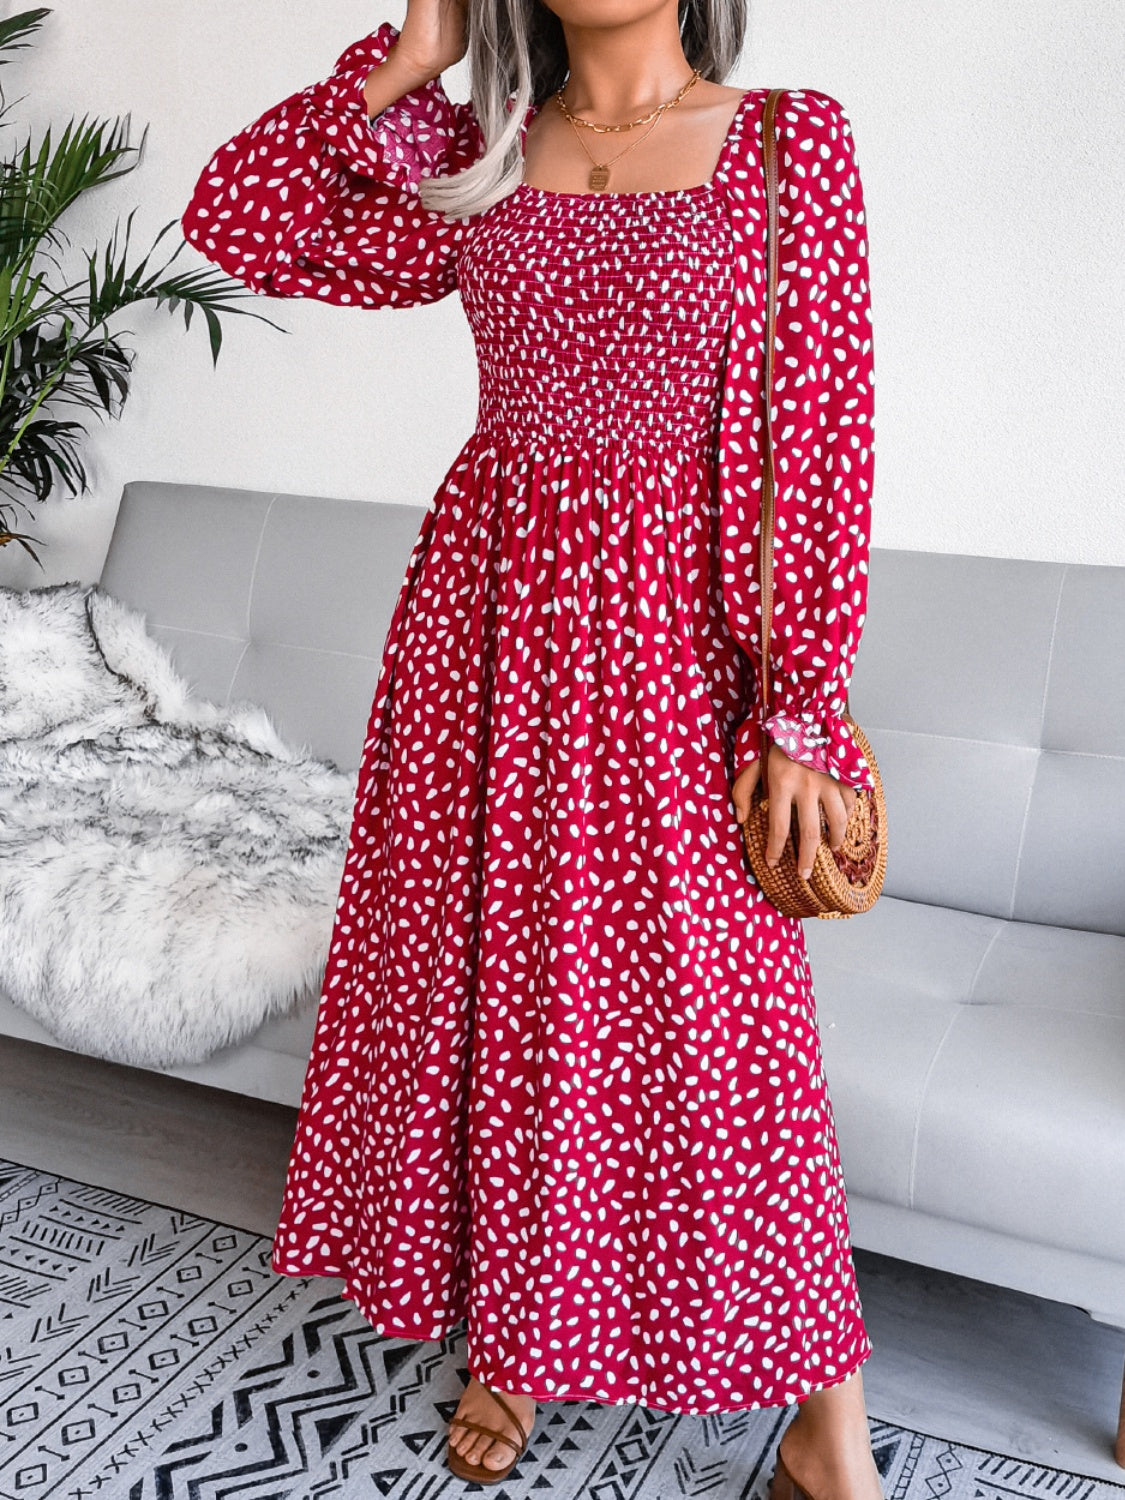 Casual Maxi Dress Smocked Square Neck Flounce Sleeves Women's Fashion